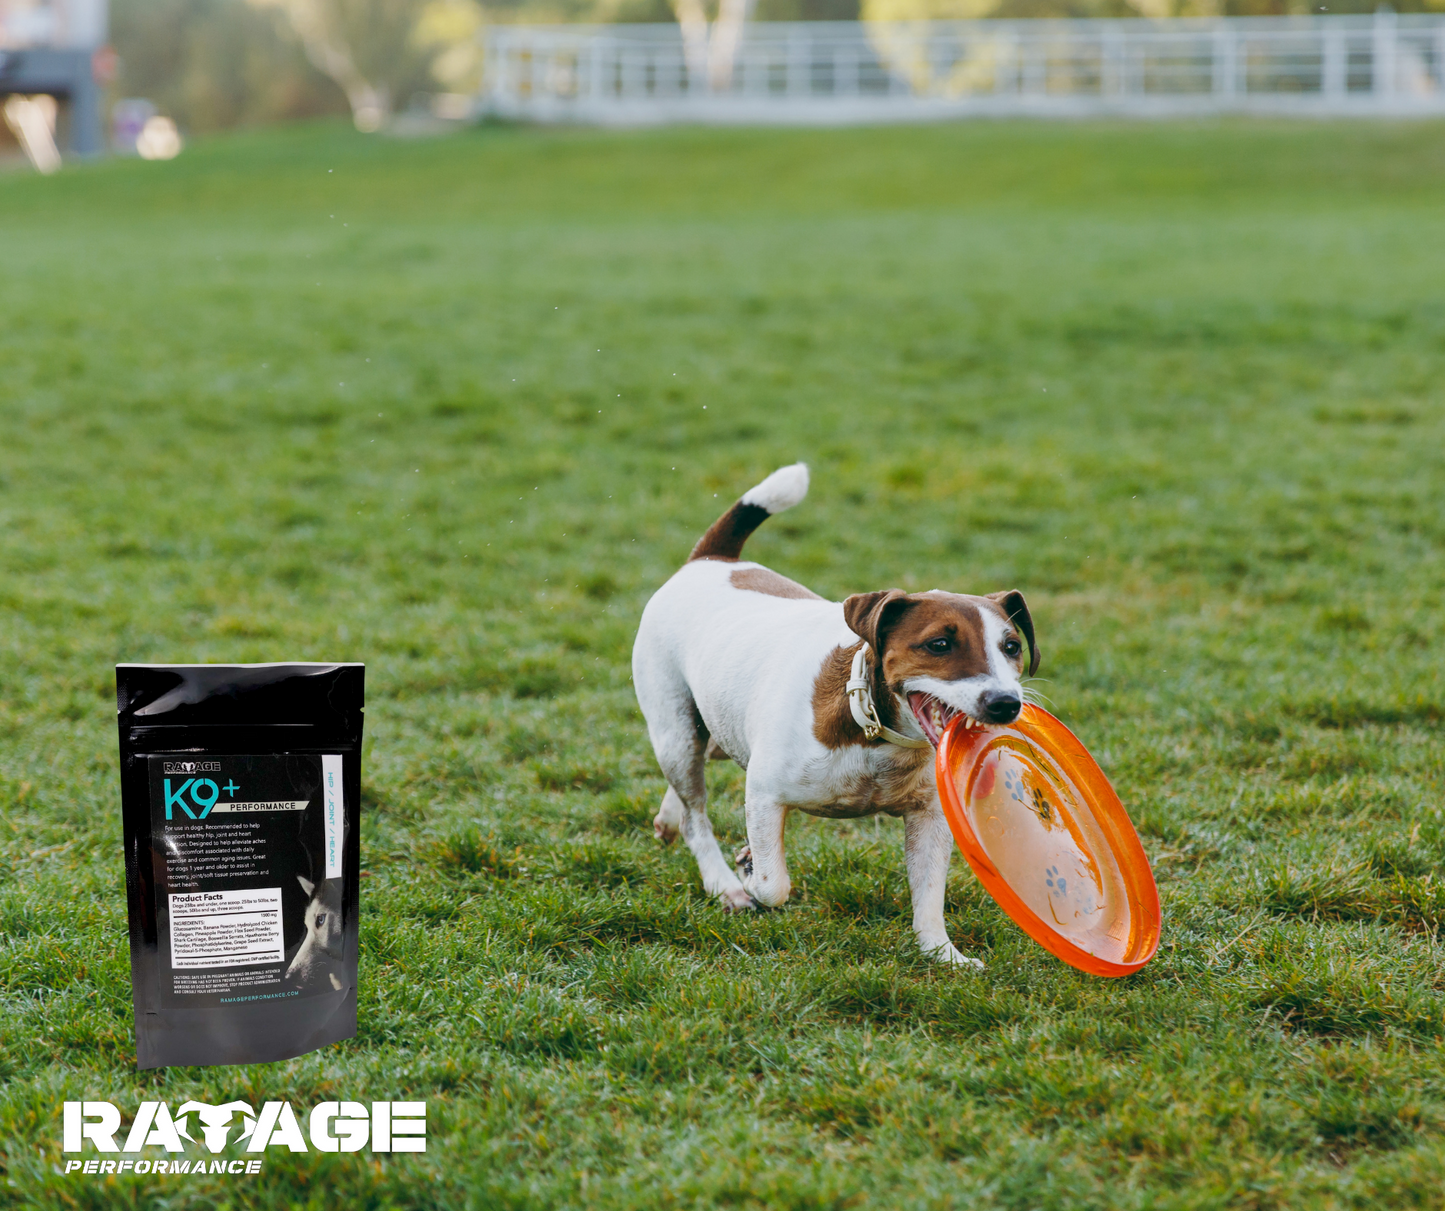 K9+ Performance for dogs (2 bags)